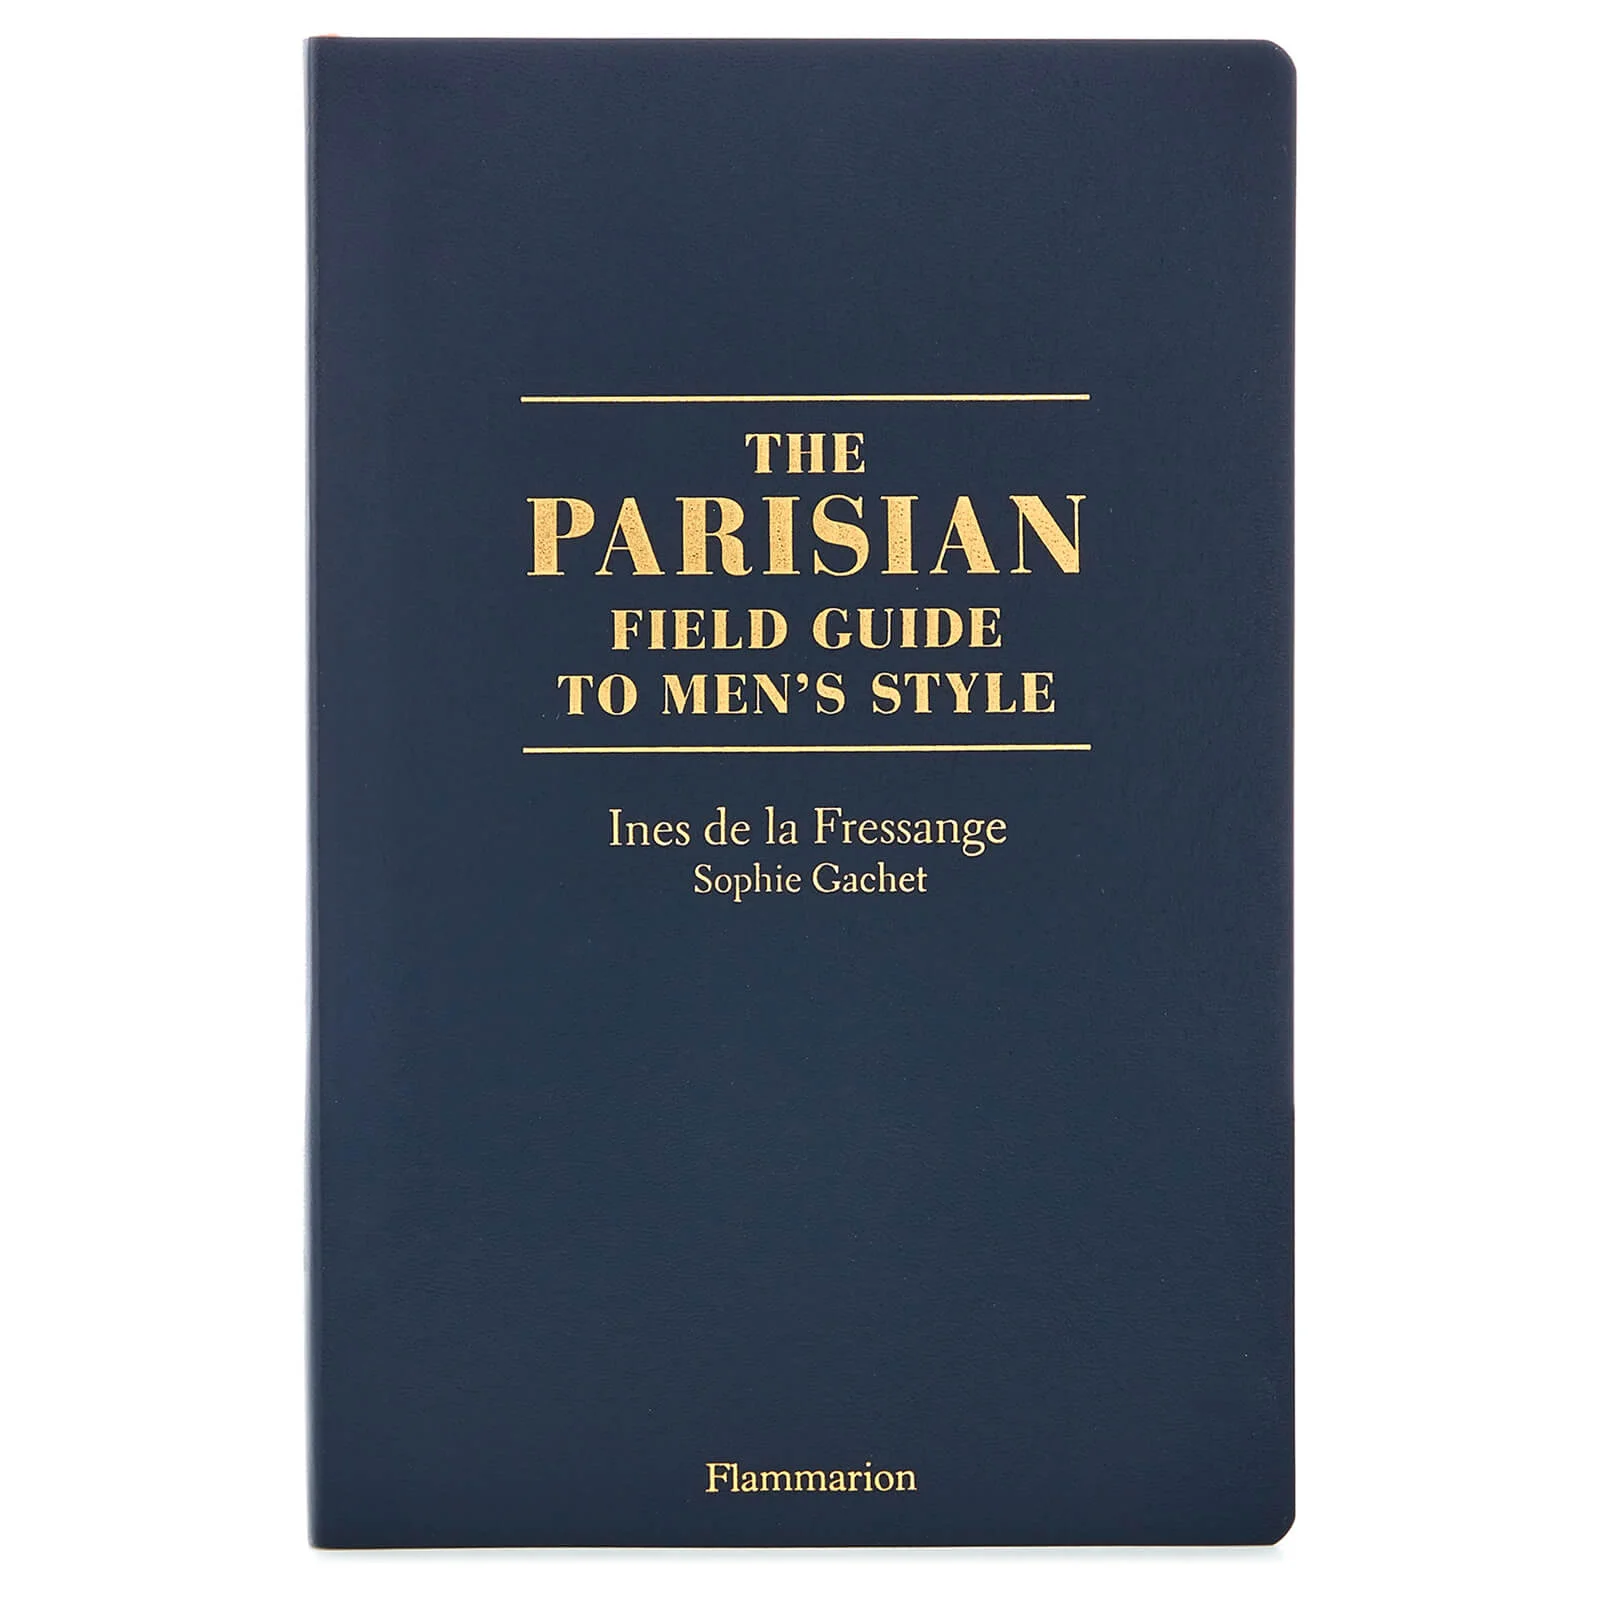 Flammarion: The Parisian Field Guide to Men's Style Image 1